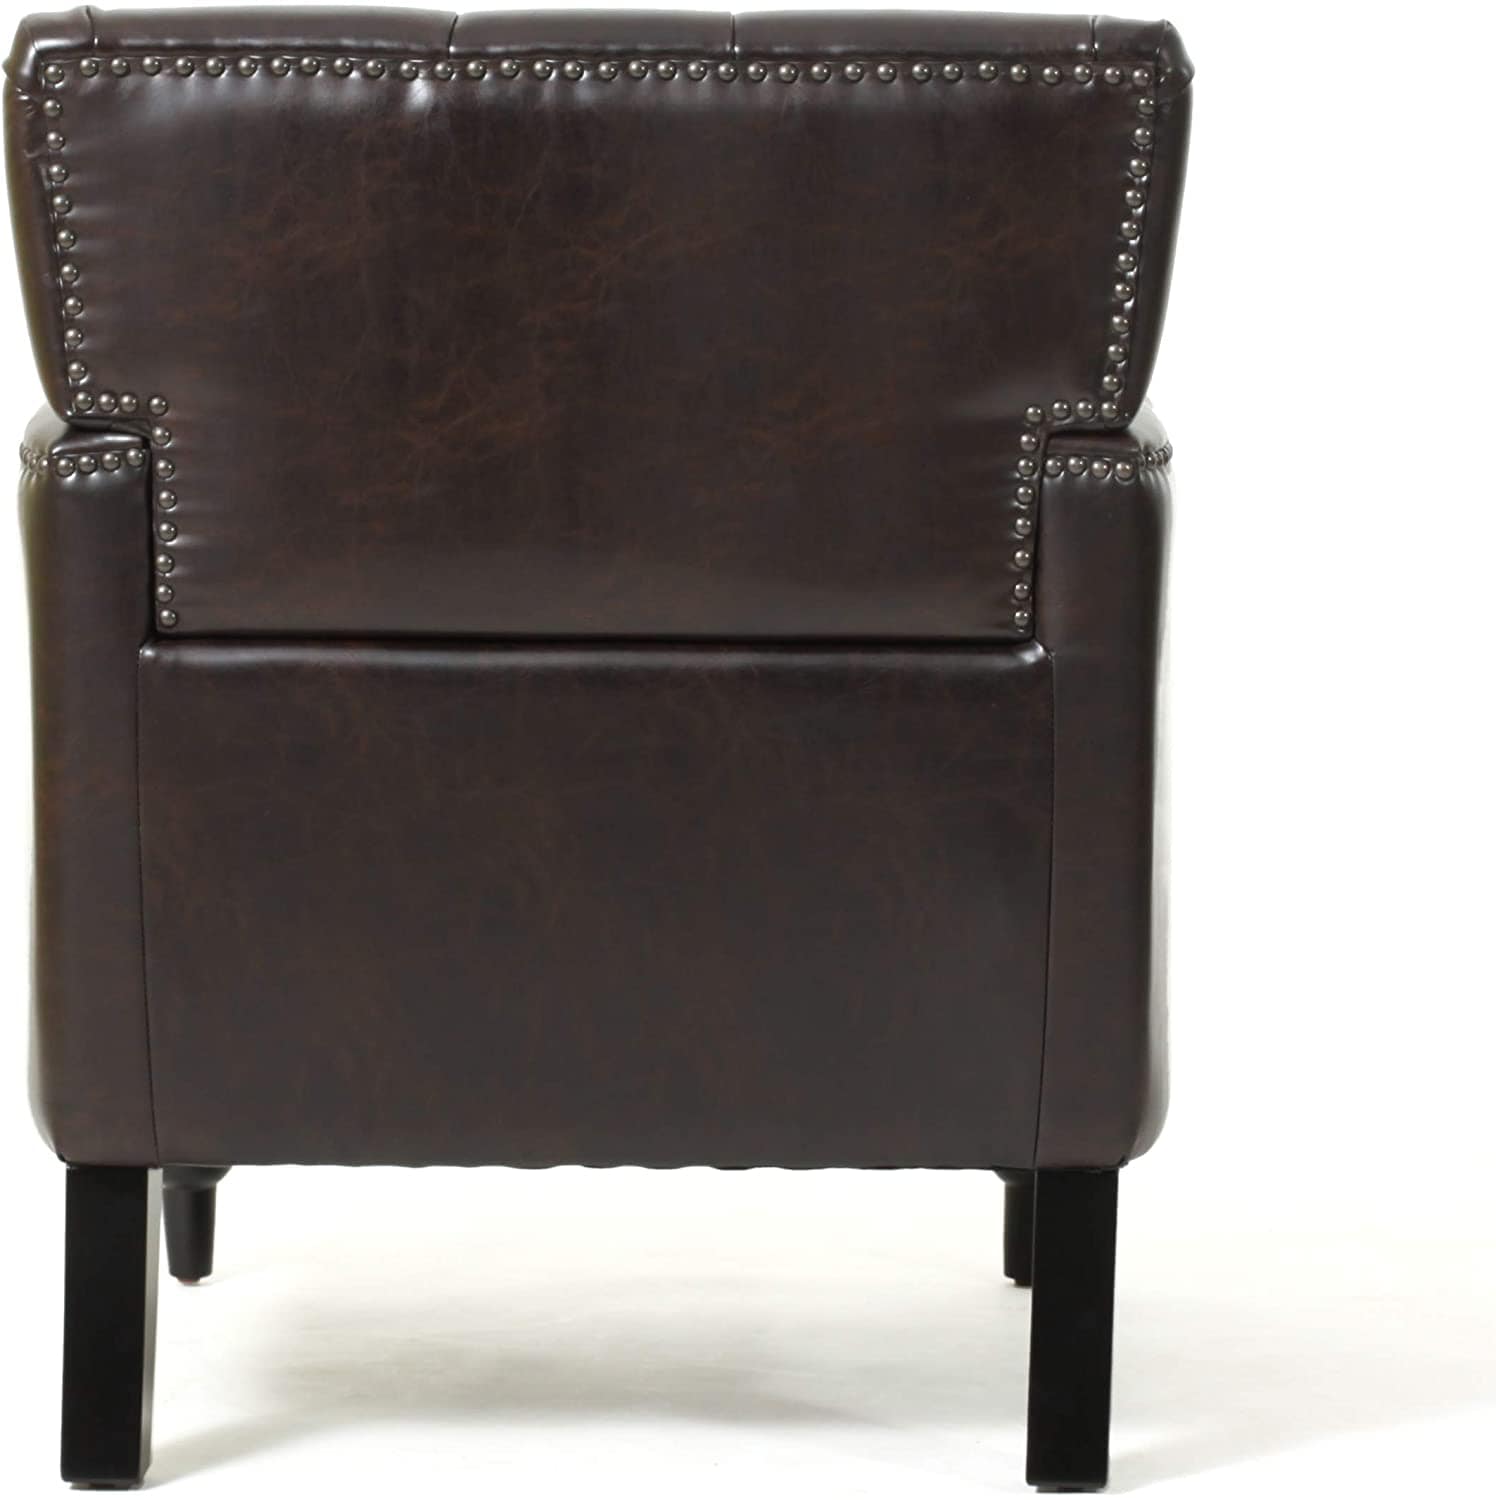 Wide Tufted Upholstery Club Chair with Arm Rest , Brown